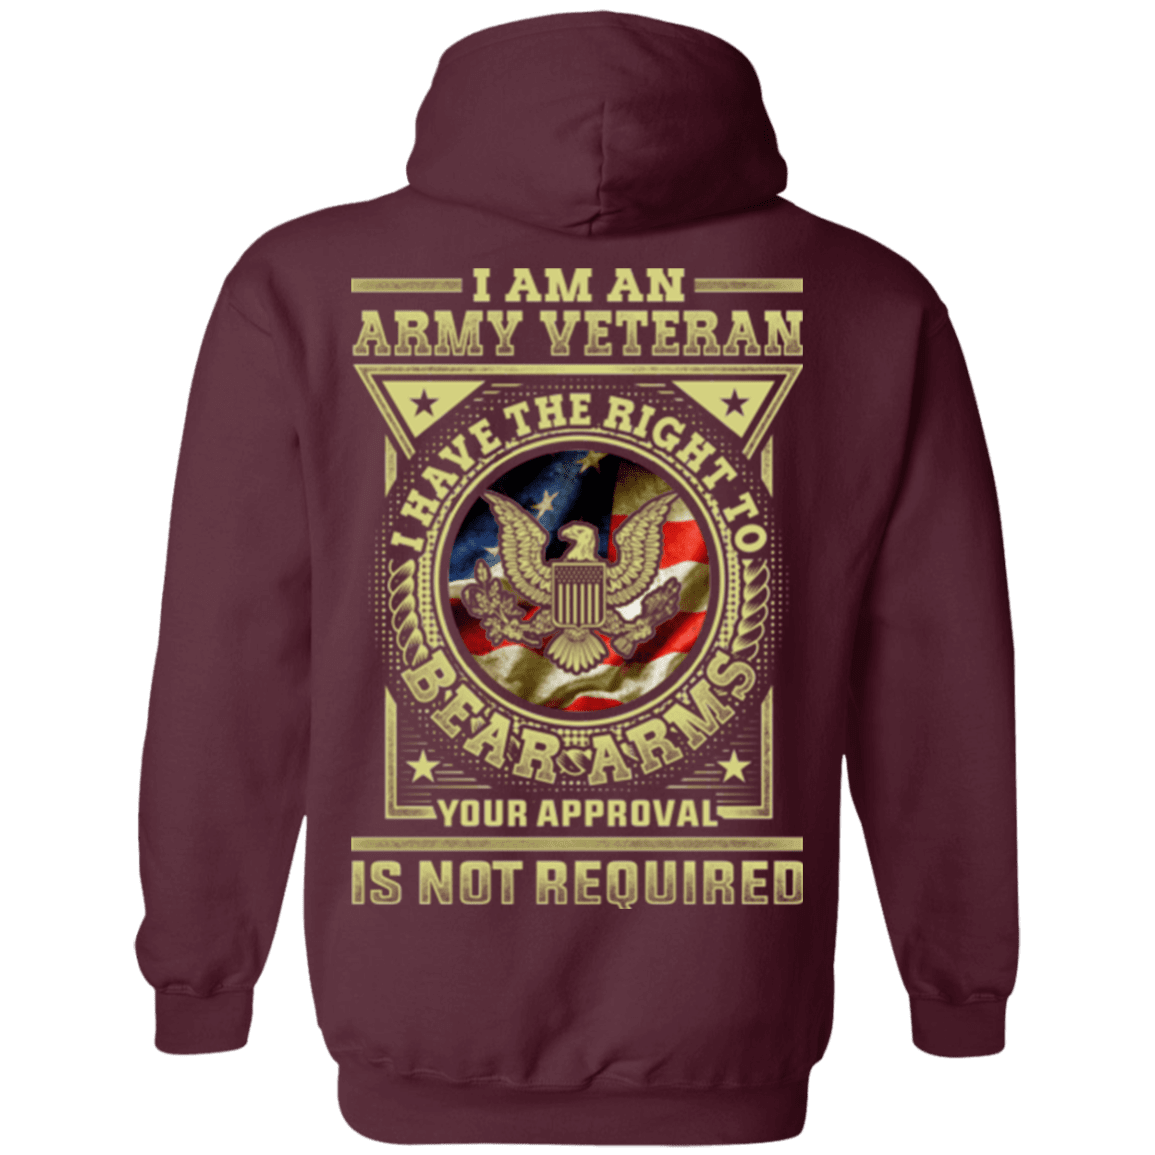 Army Veteran Have the Right To Bear Arms Men Back T Shirts-TShirt-Army-Veterans Nation